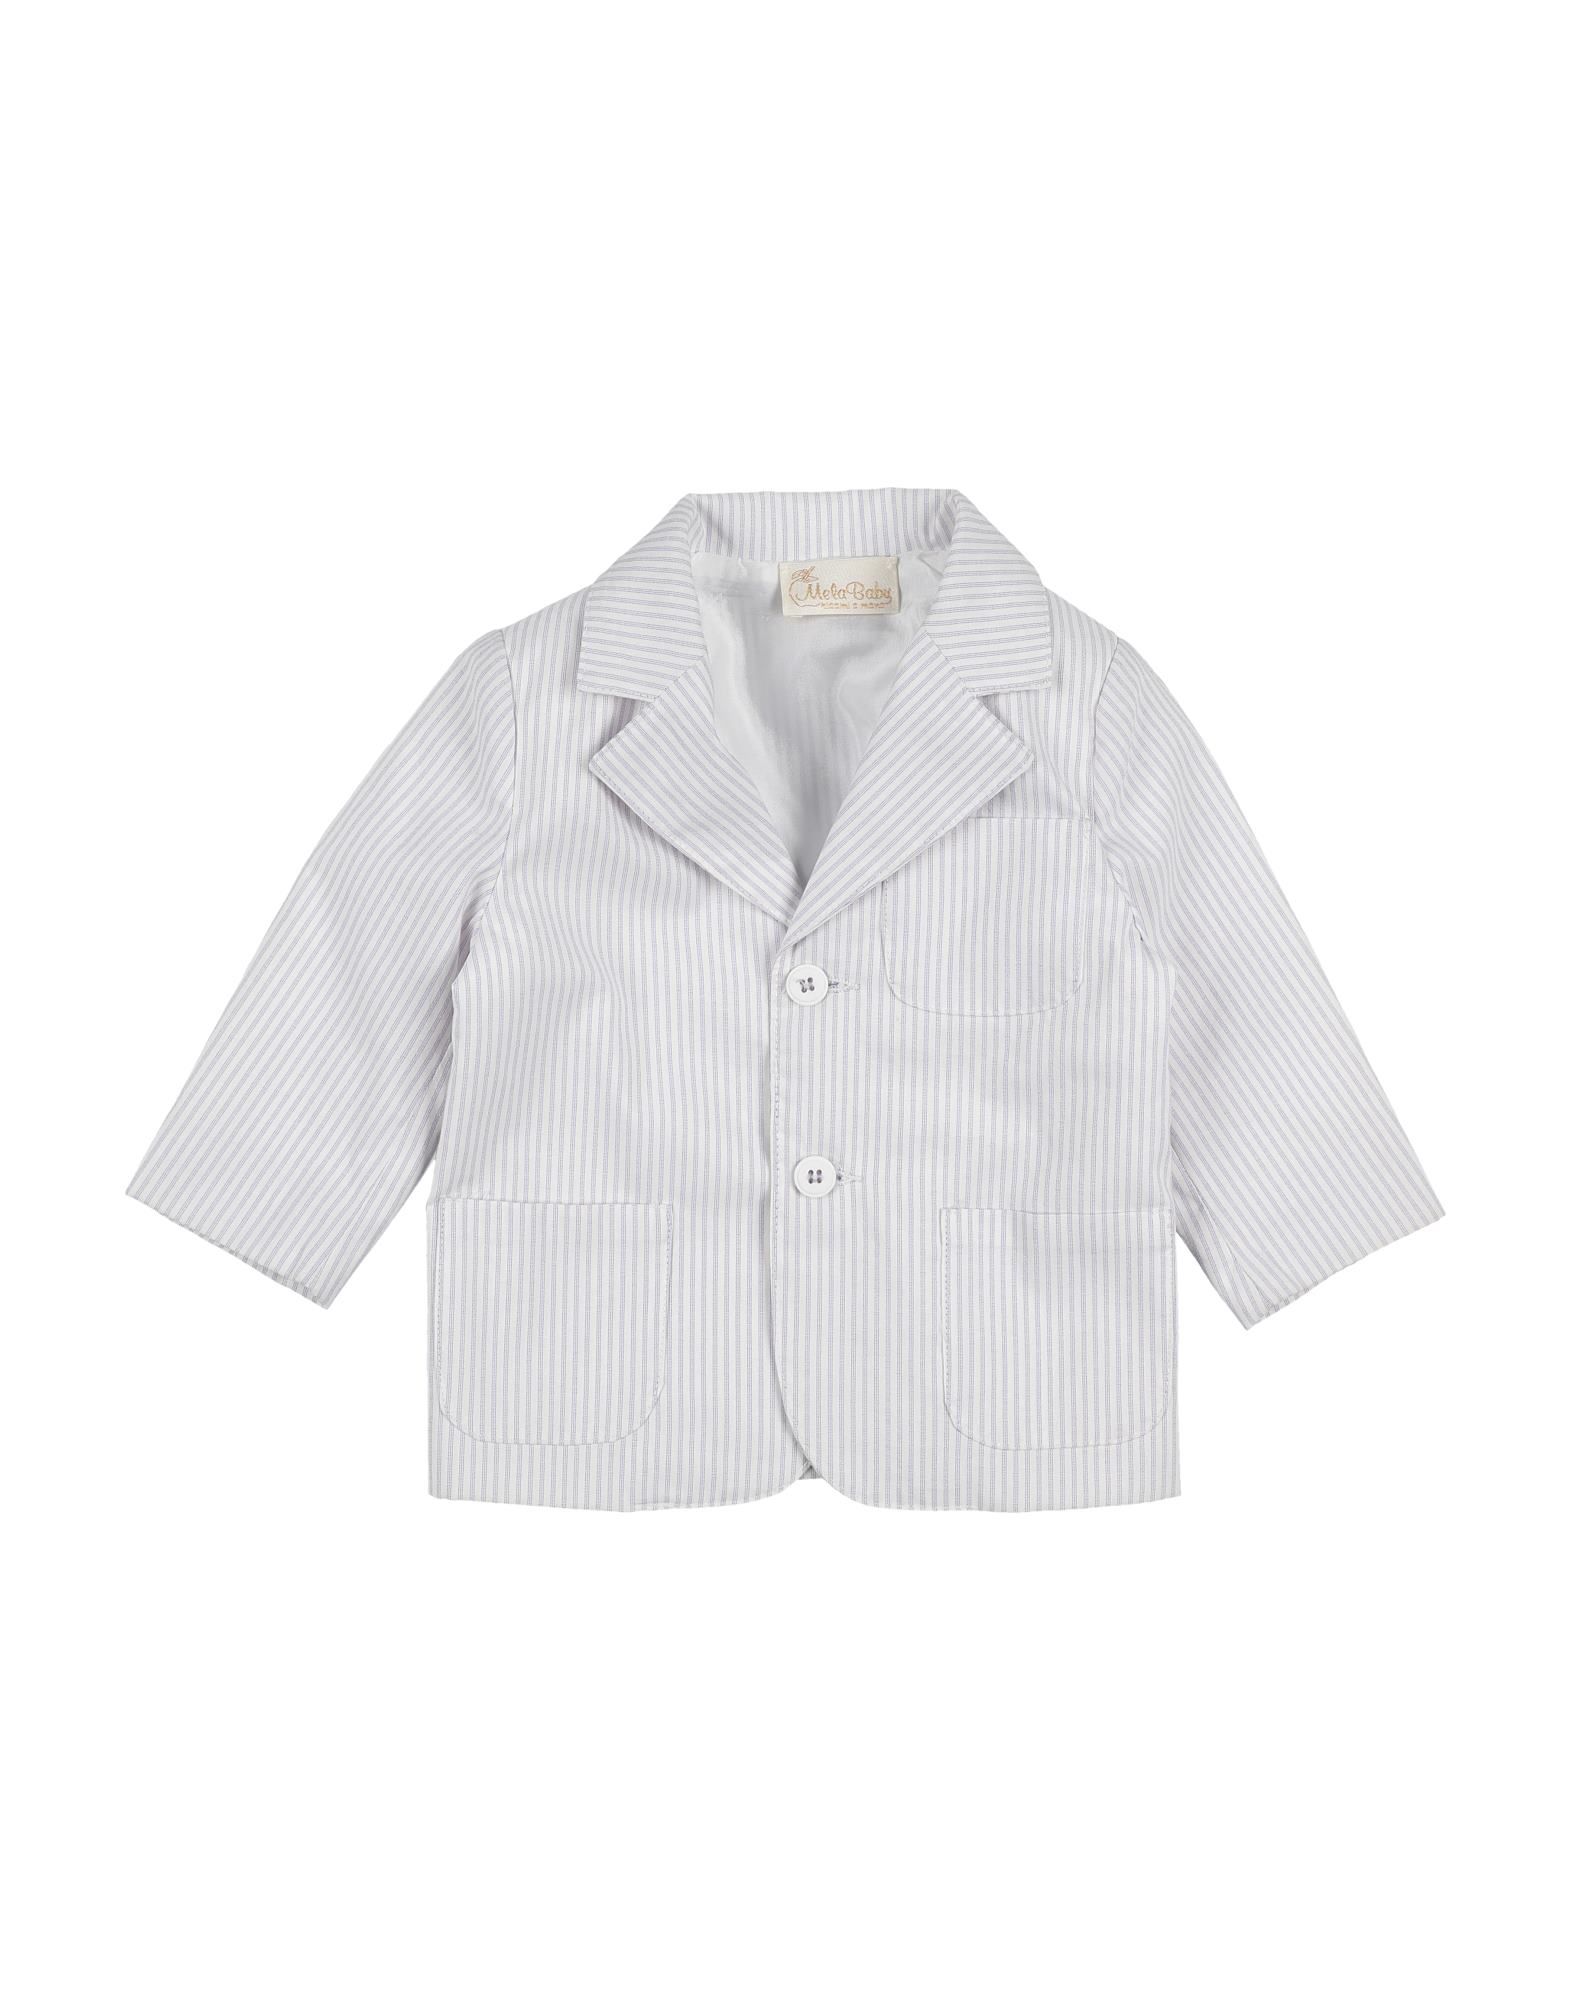 Mela Baby Kids' Suit Jackets In White